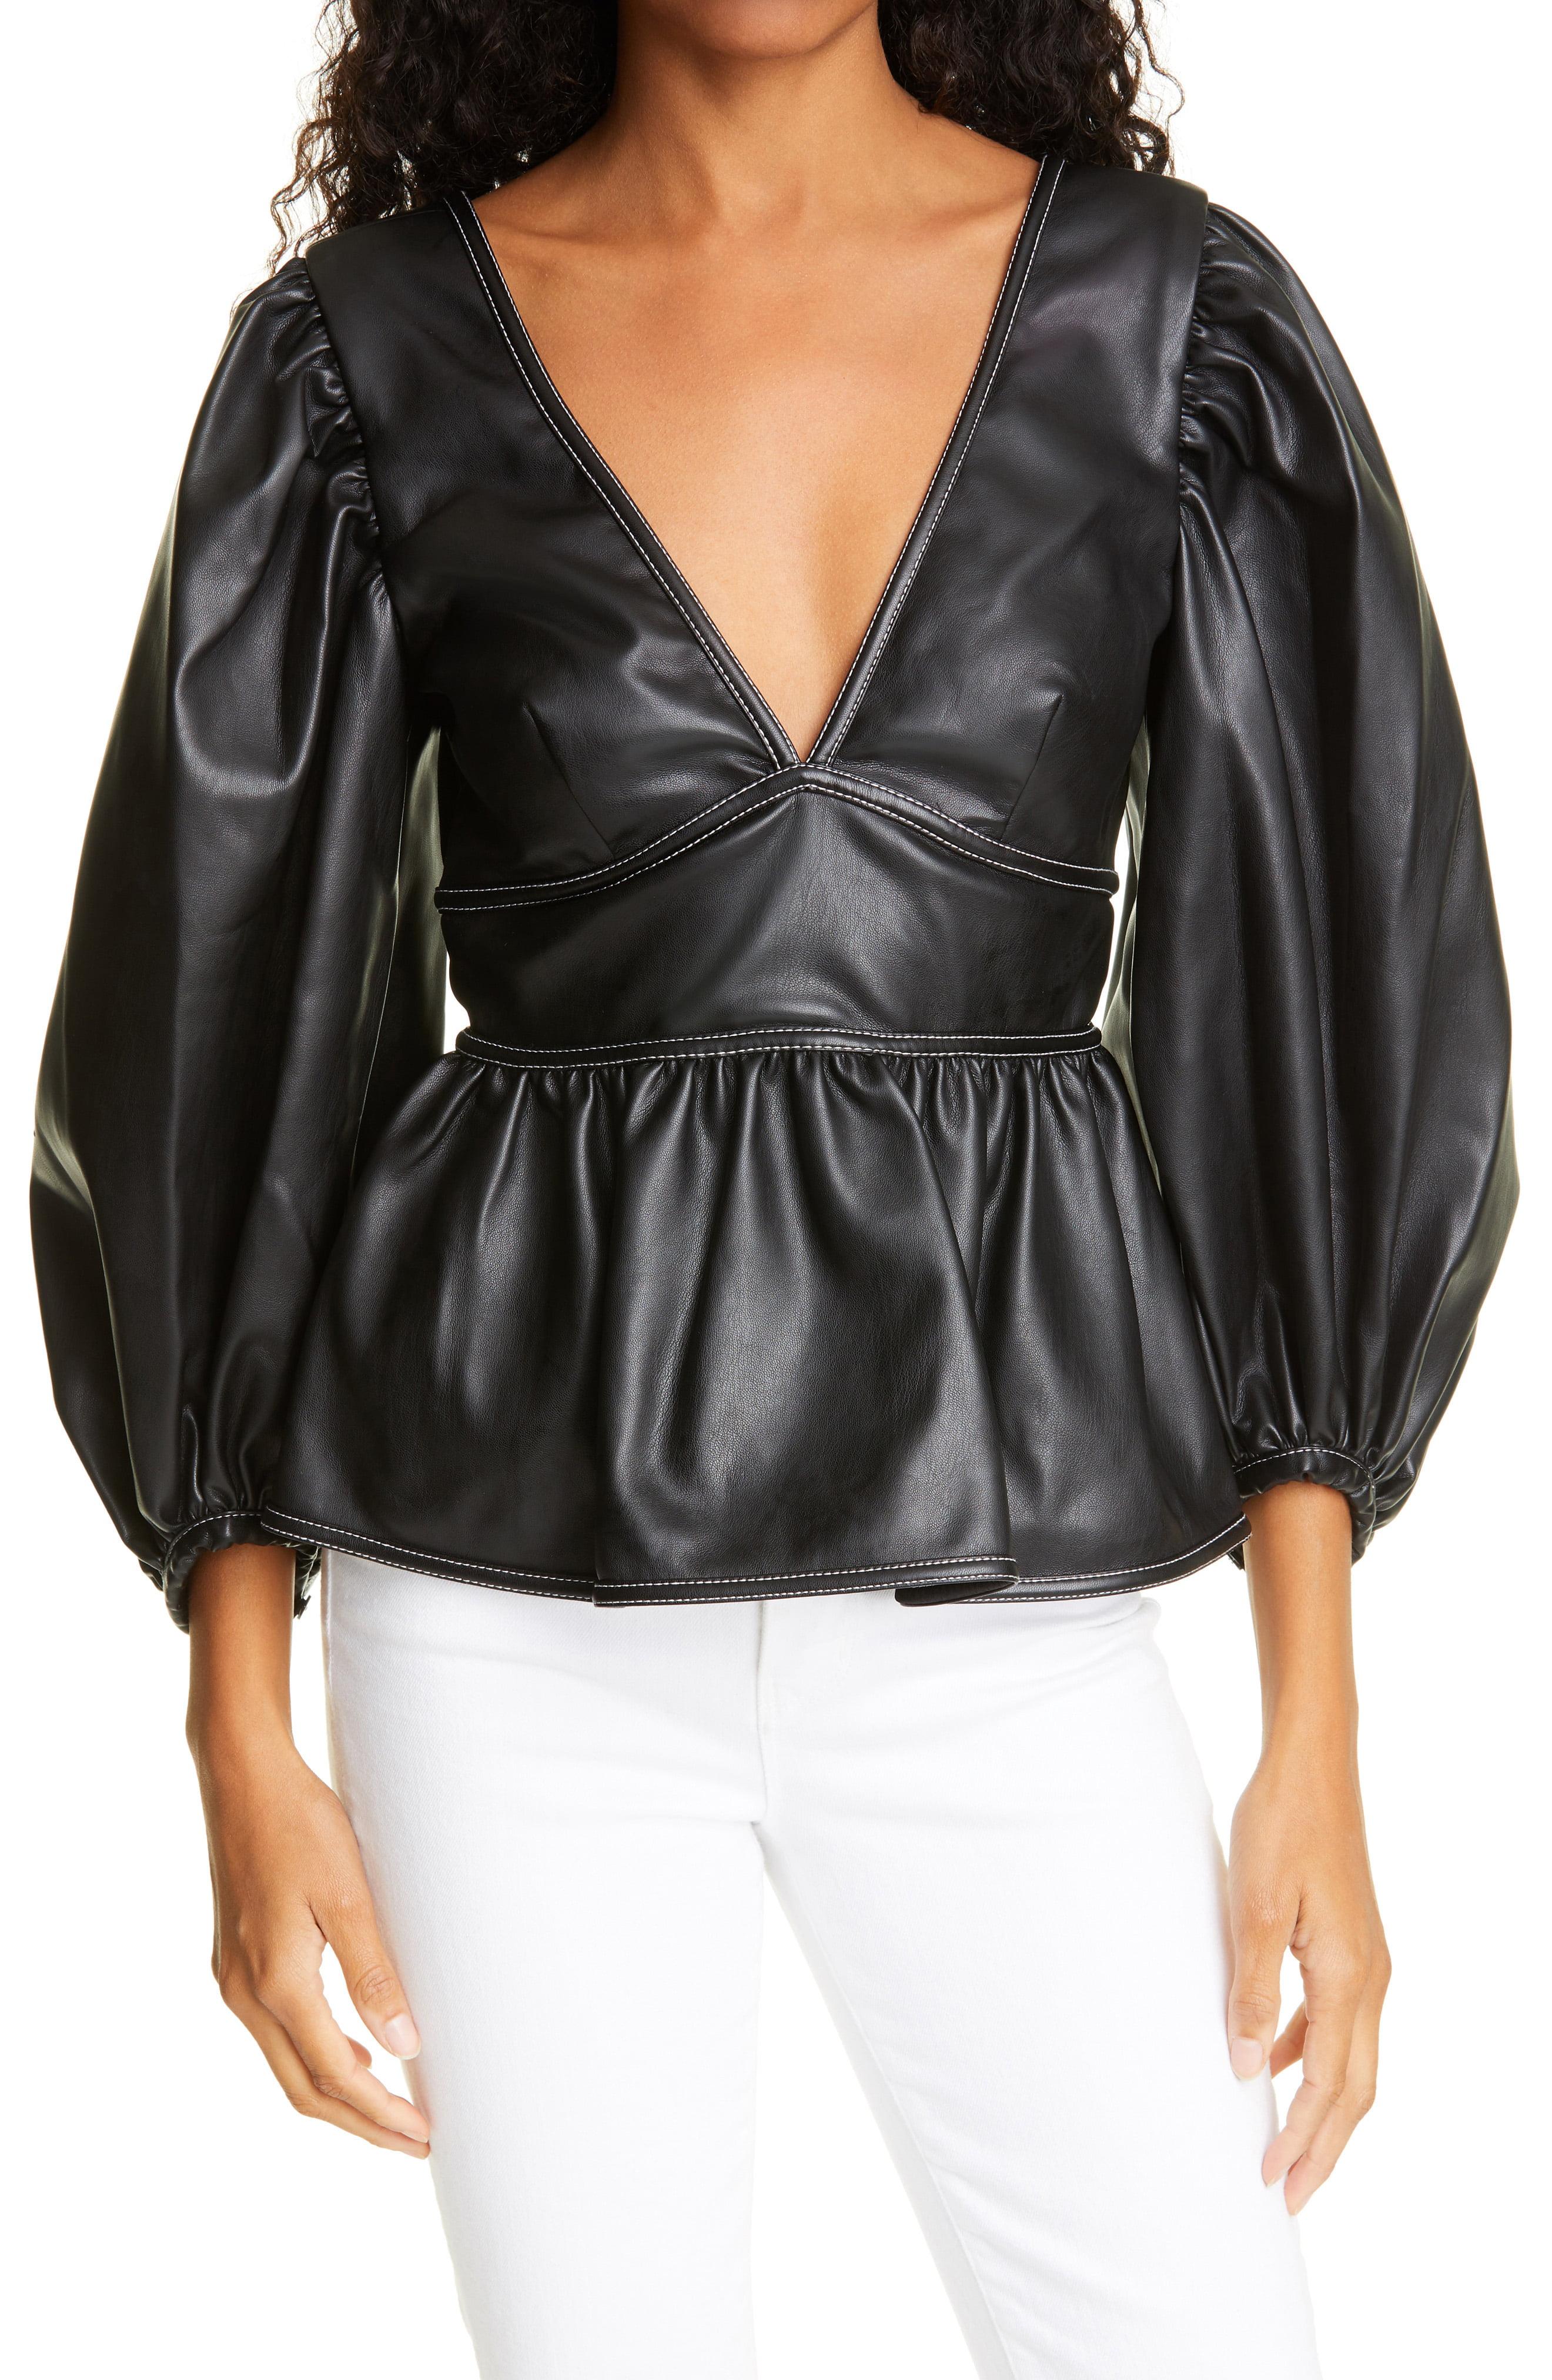 STAUD Luna Faux Leather Blouse in Black - Lyst